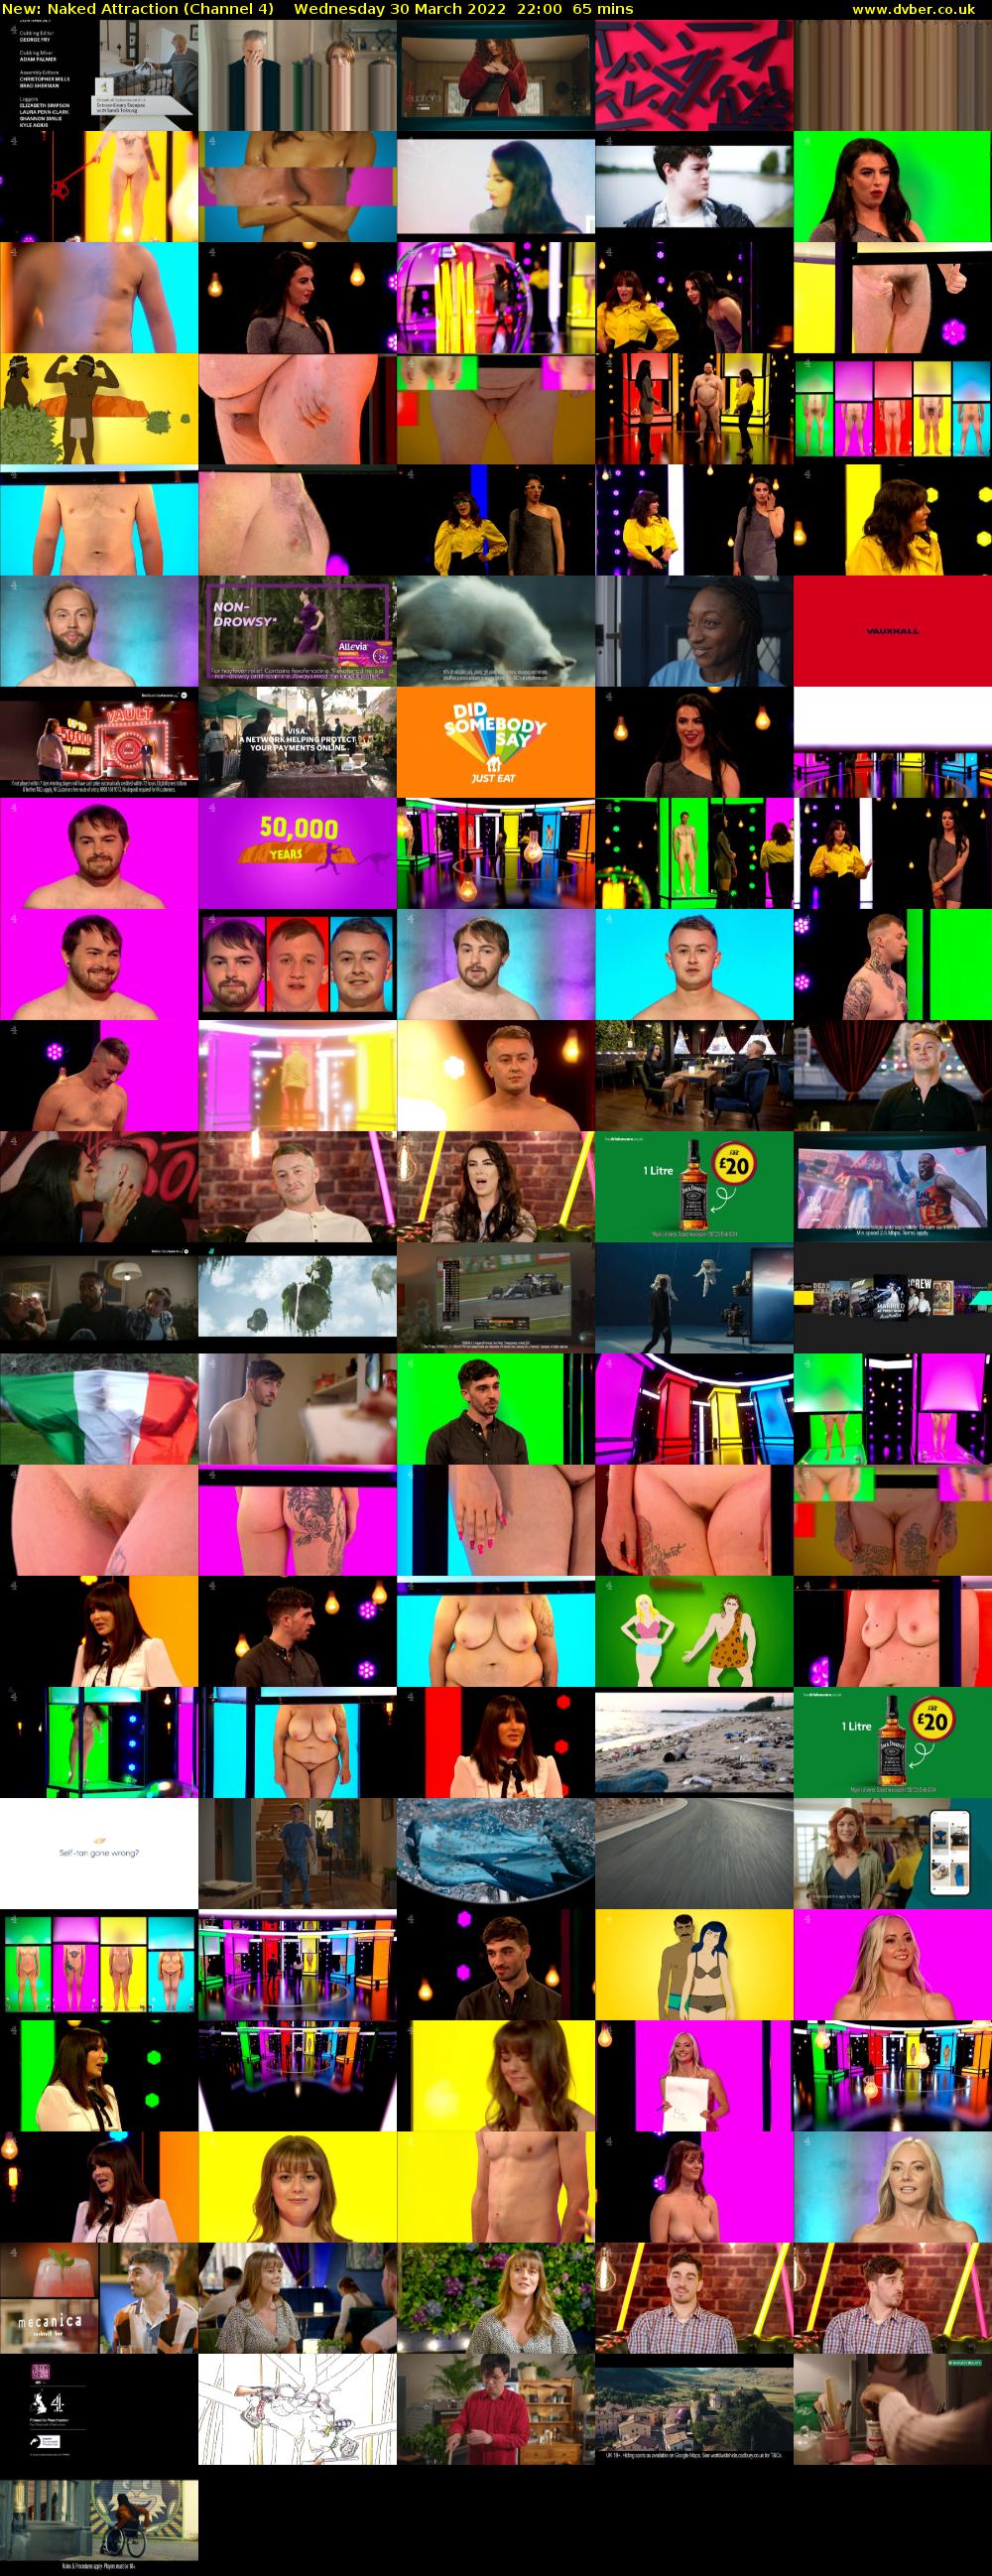 Naked Attraction (Channel 4) Wednesday 30 March 2022 22:00 - 23:05